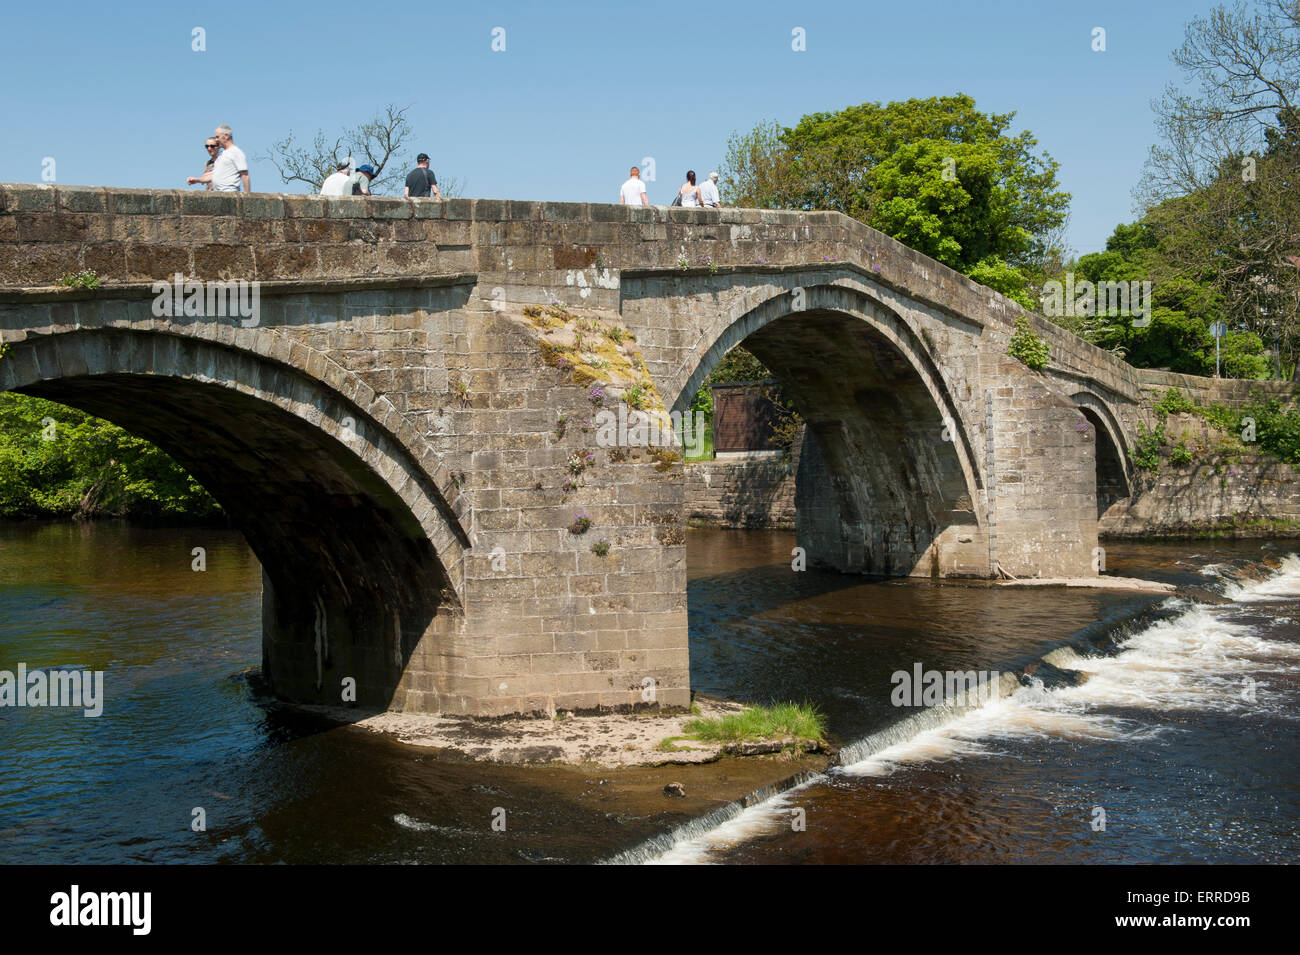 People crossing scenic River Wharfe on old stone packhorse bridge over flowing water & small weir - Old Bridge, Ilkley, West Yorkshire, England, UK. Stock Photo